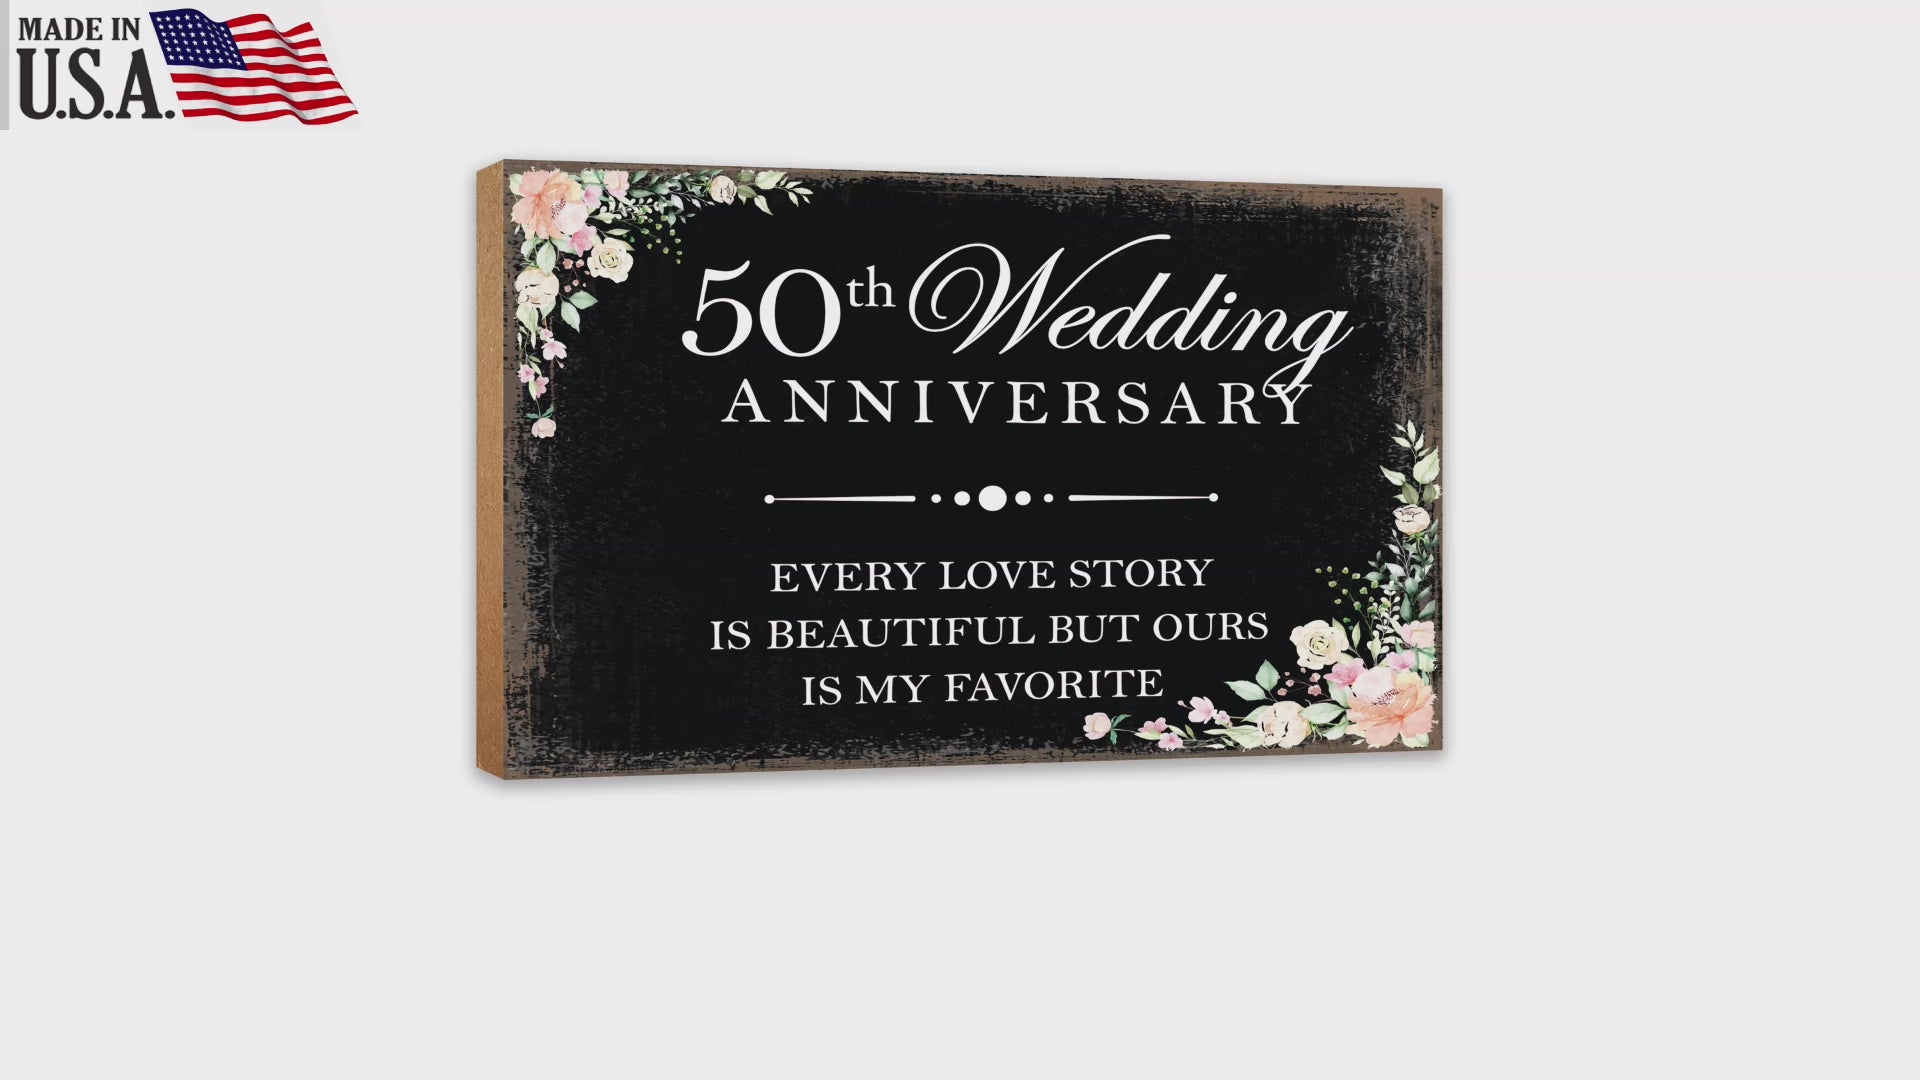 50th Wedding Anniversary Unique Shelf Decor and Tabletop Signs Gifts for Couples - Every Love Story